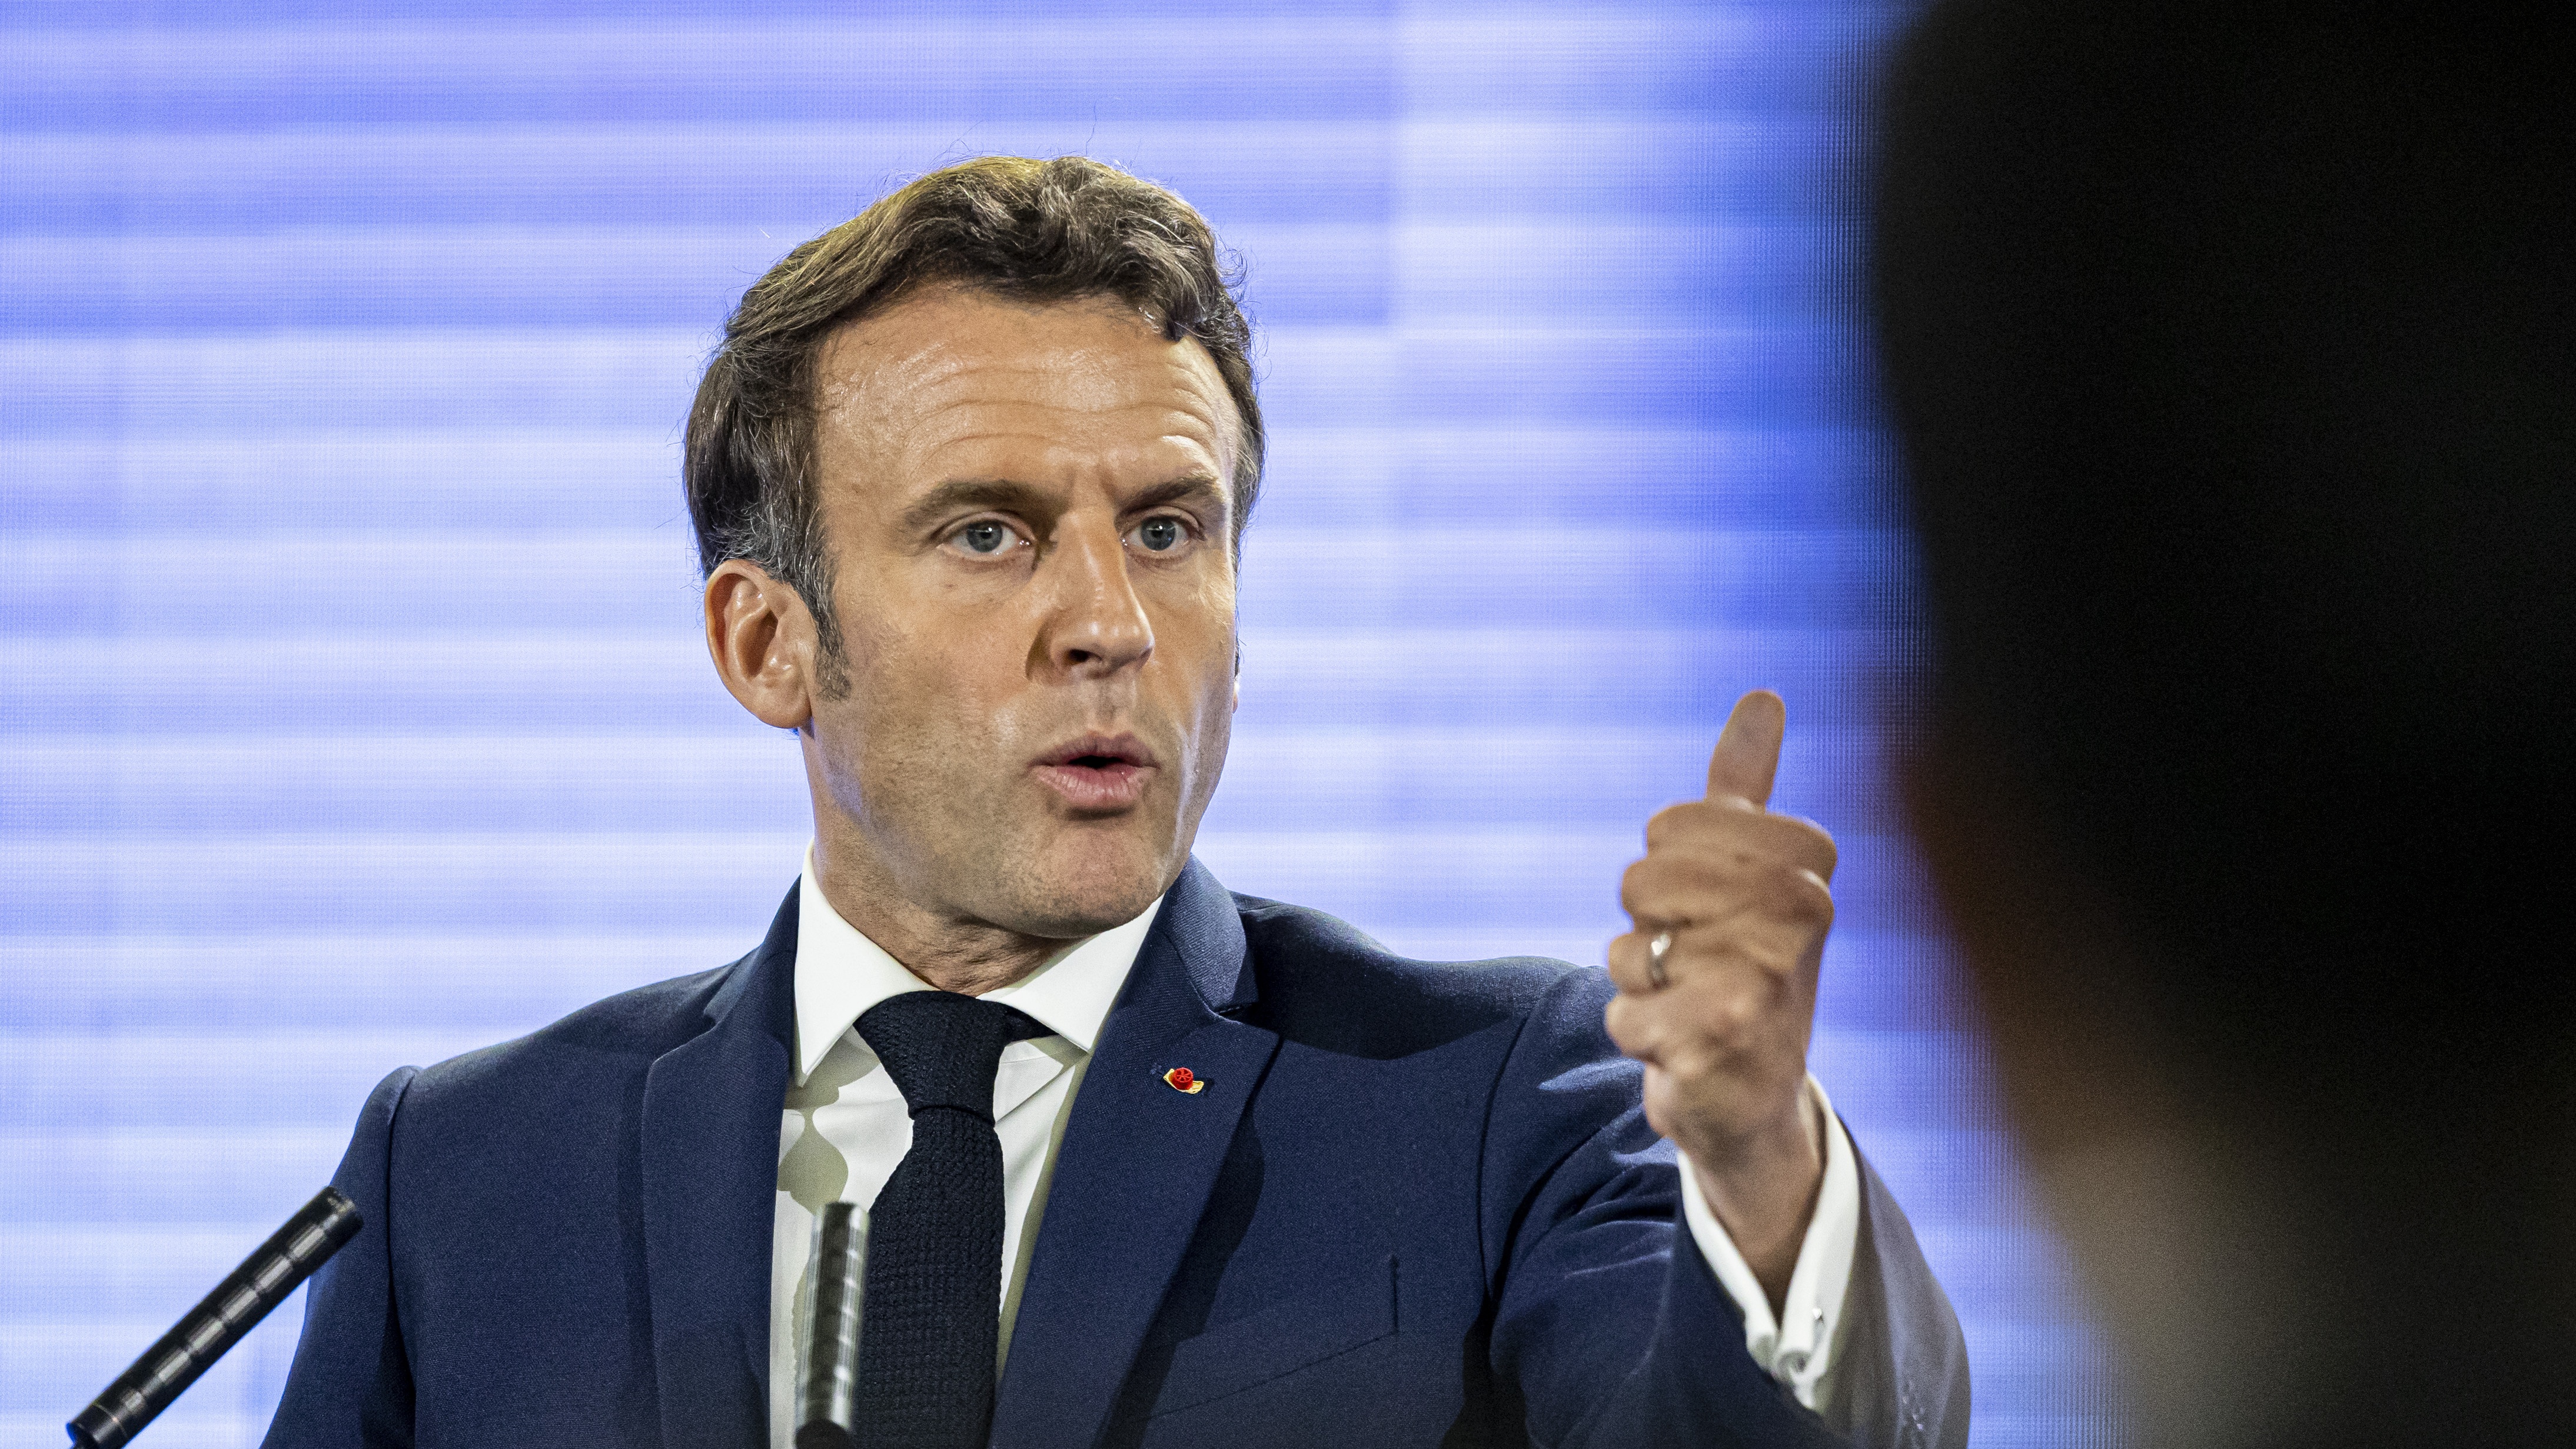 Emmanuel Macron outlines his vision for a new European organisation during a speech in Strasbourg